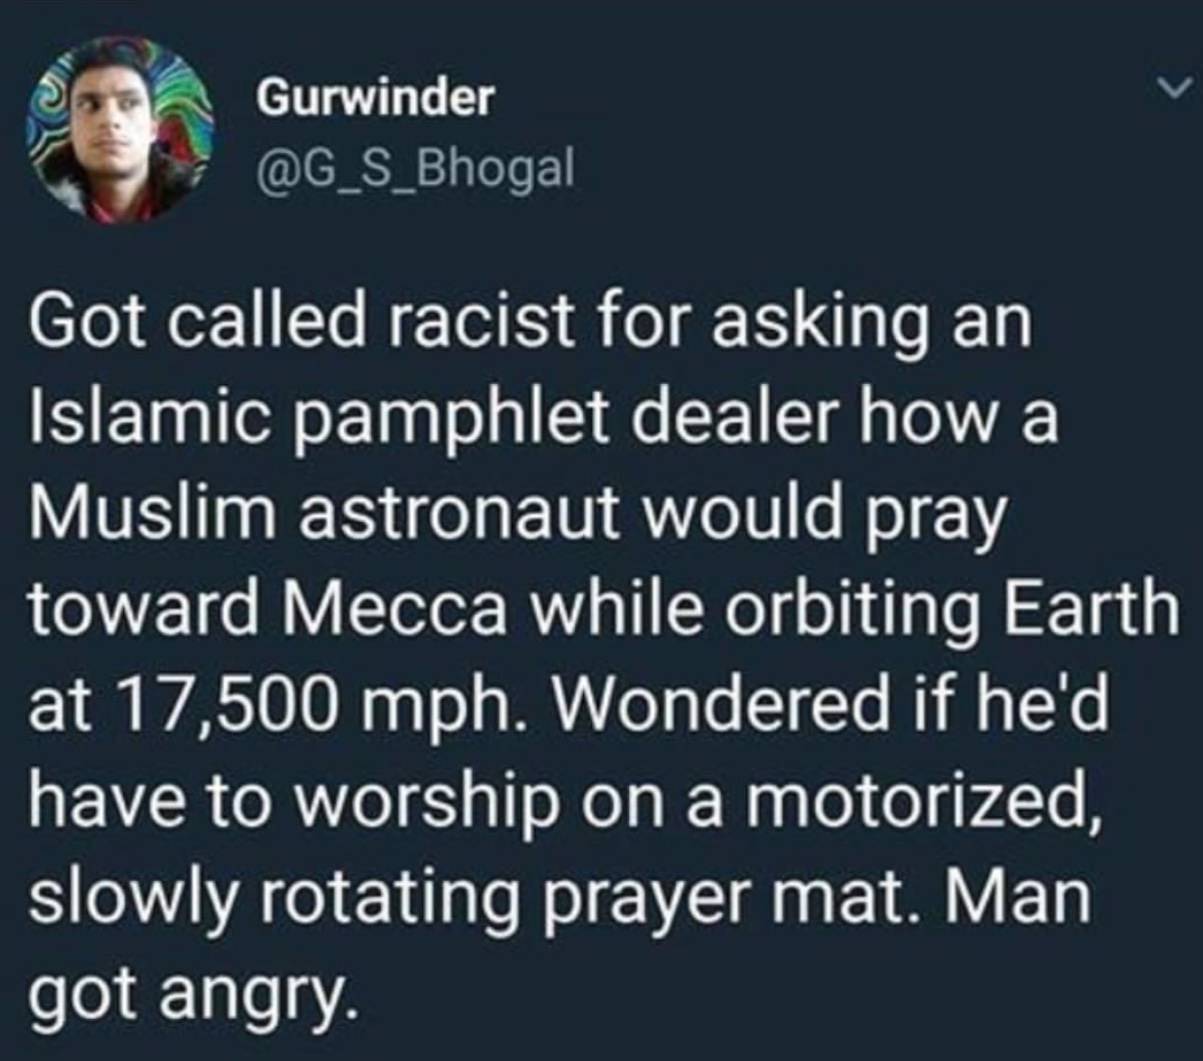 daniel duncan williams tweets - Gurwinder Got called racist for asking an Islamic pamphlet dealer how a Muslim astronaut would pray toward Mecca while orbiting Earth at 17,500 mph. Wondered if he'd have to worship on a motorized, slowly rotating prayer ma